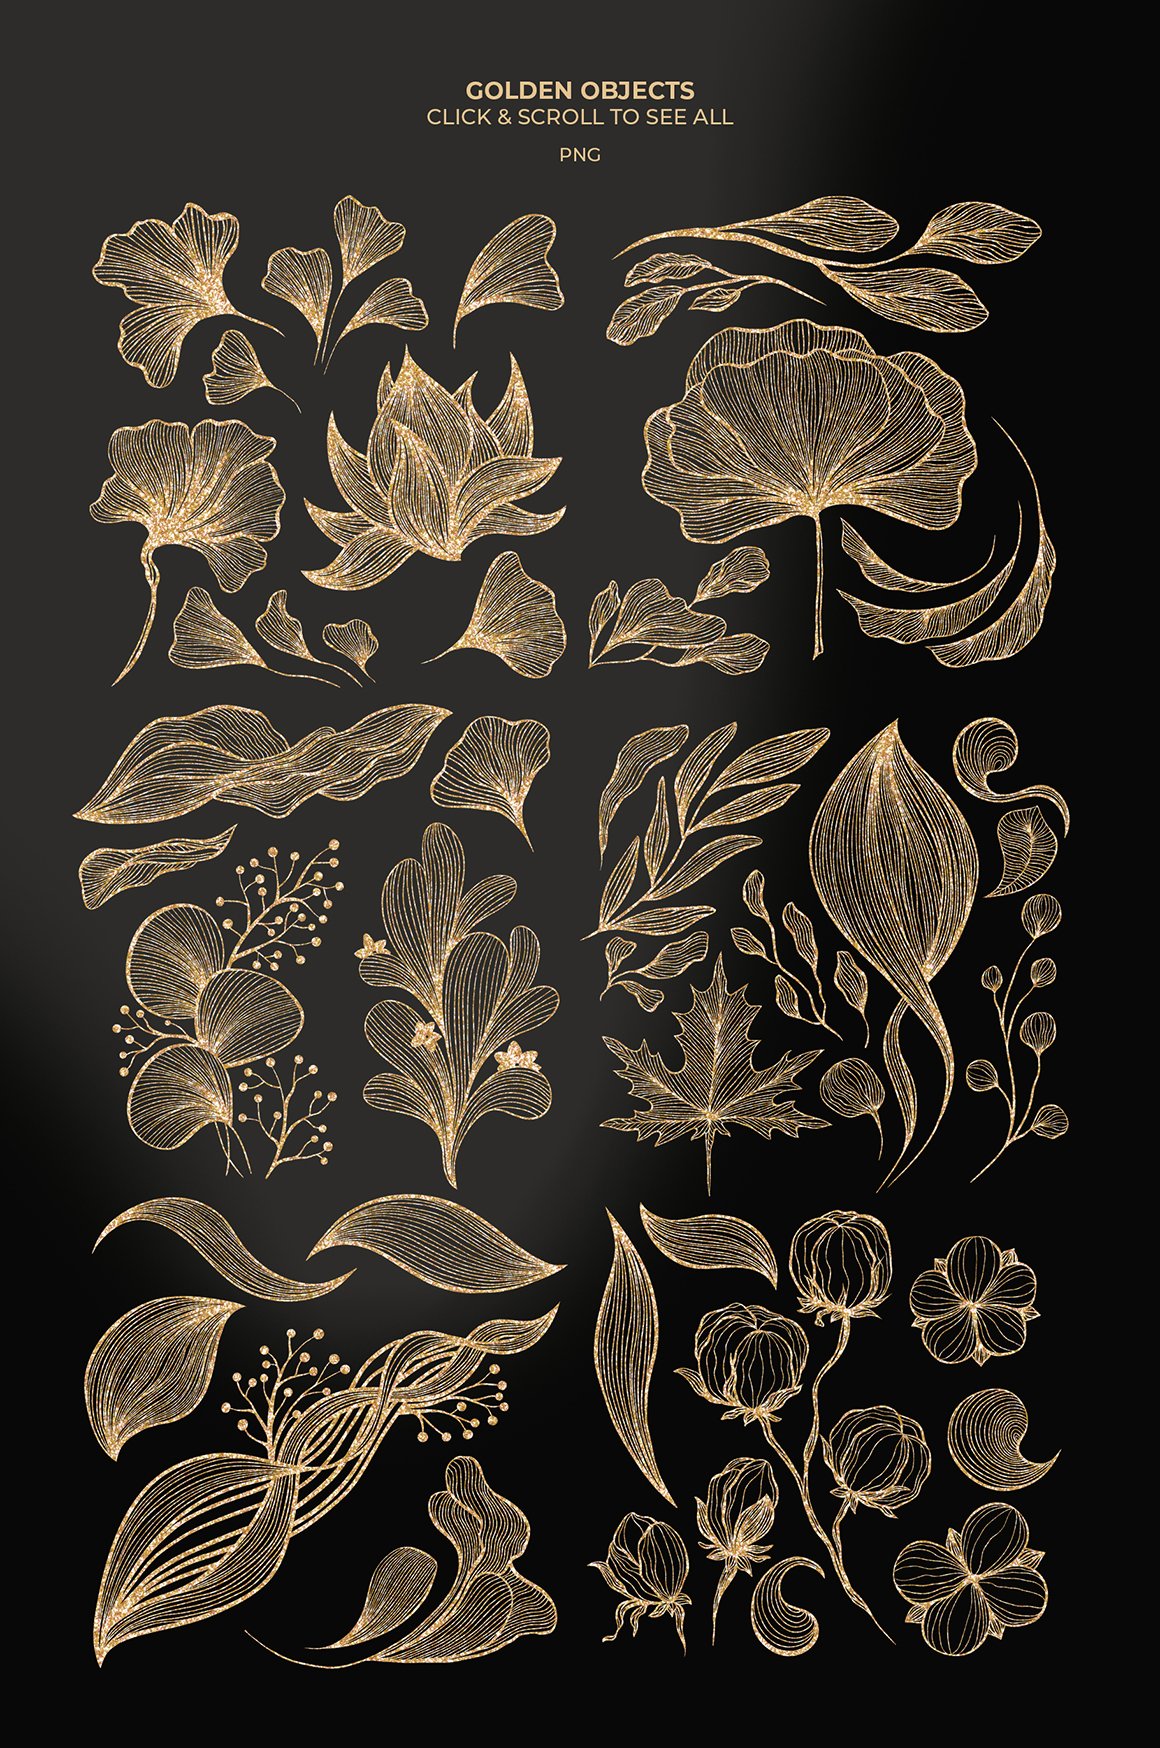 Gold & Black Waves, Lines and Flowers